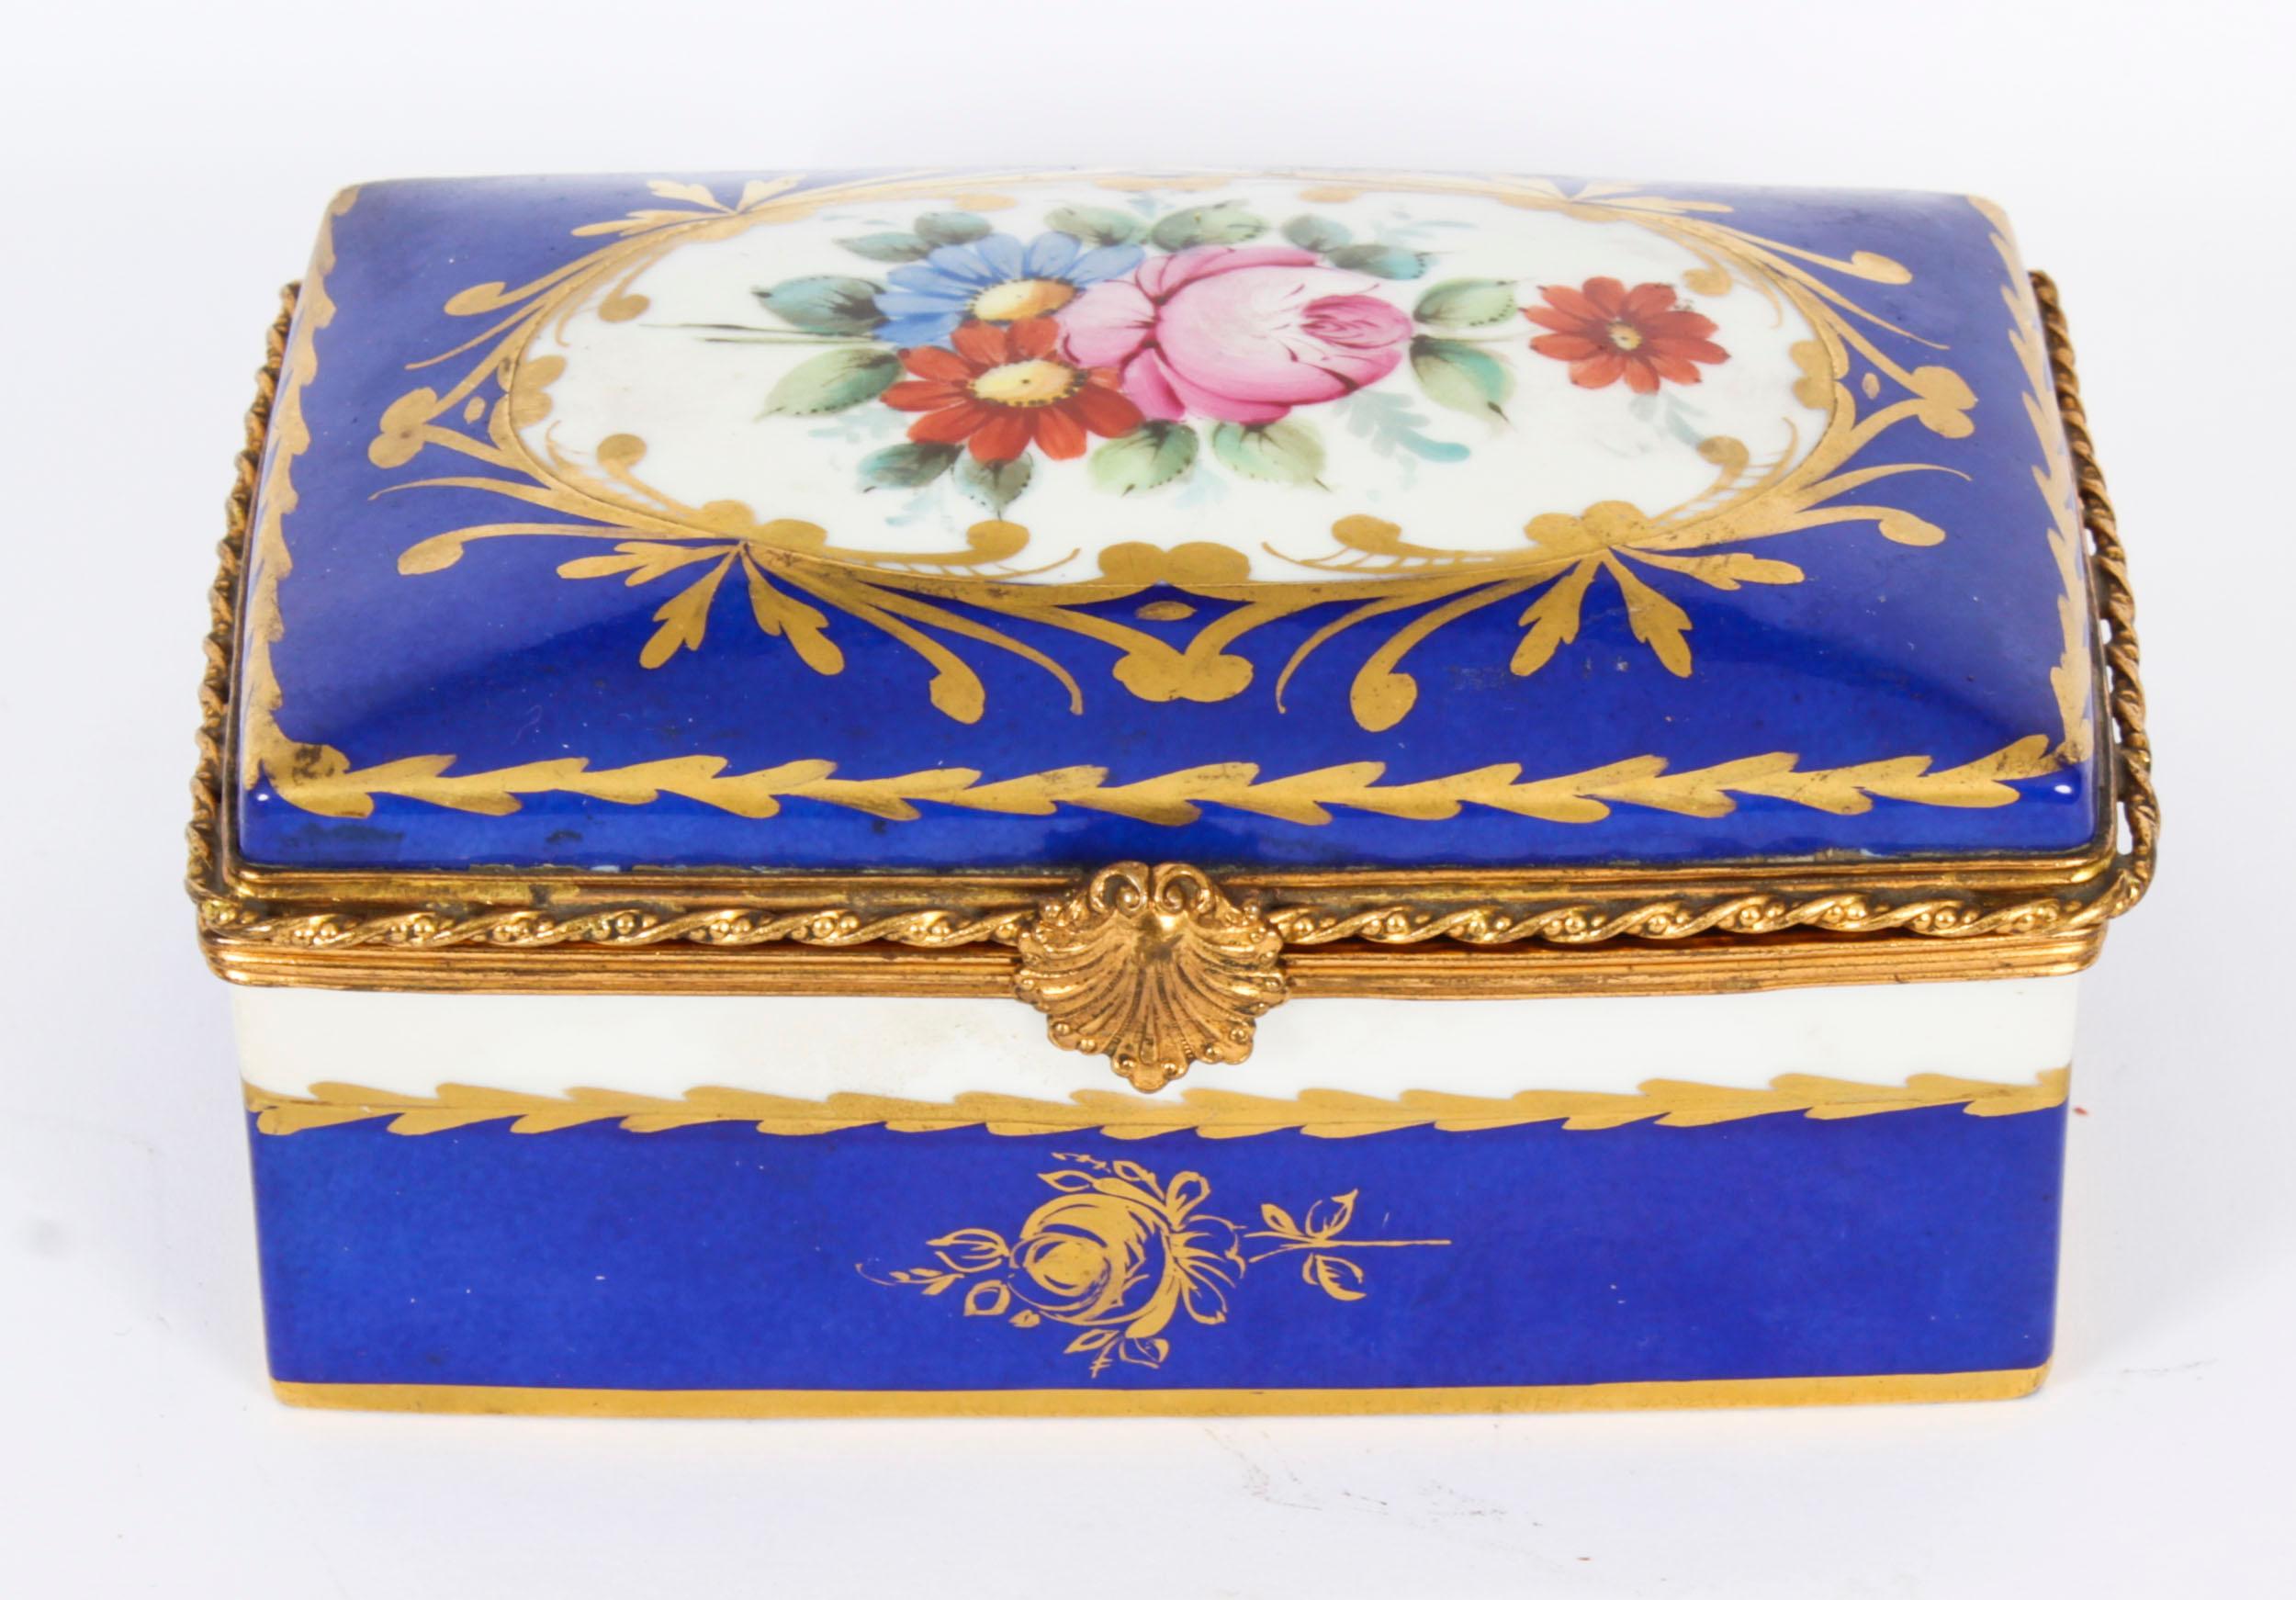 This is a beautiful antique French Limoges ormolu mounted rectangular bombe' shaped table casket, circa 1870 in date and bearing the Limoges marks on the underside.

The Royal Blue casket is beautifully decorated  with poppies and country flowers,